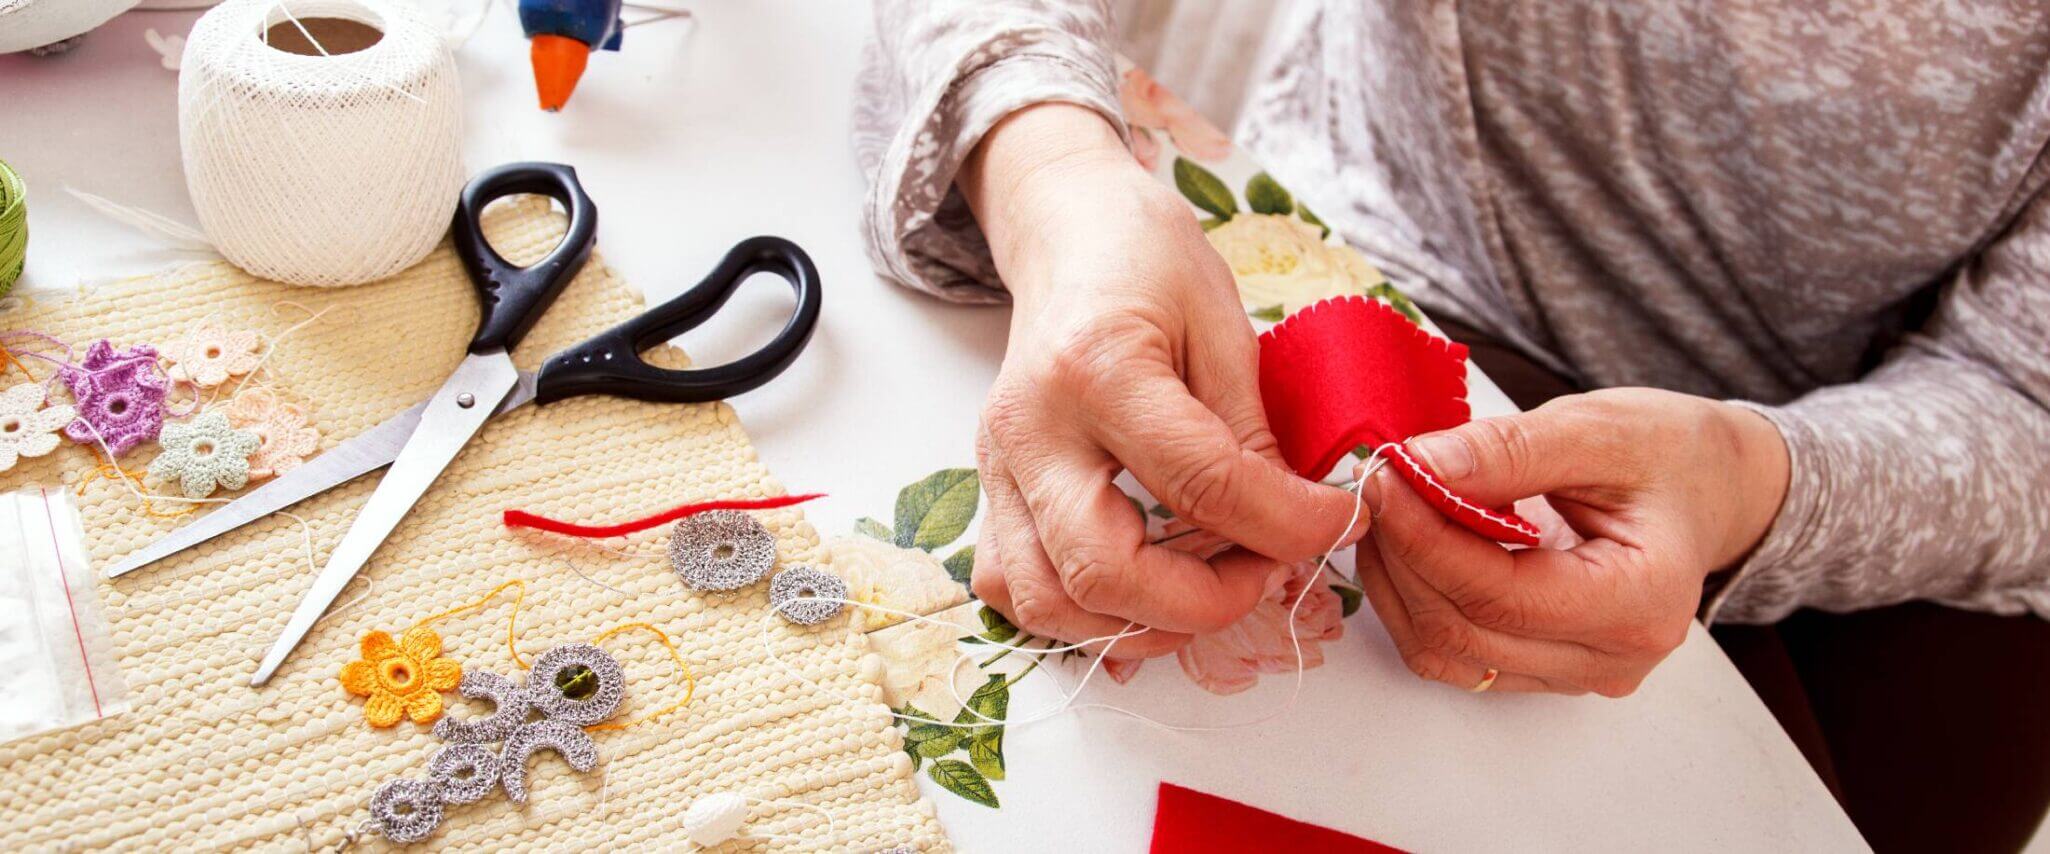 Easy crafts for seniors with dementia